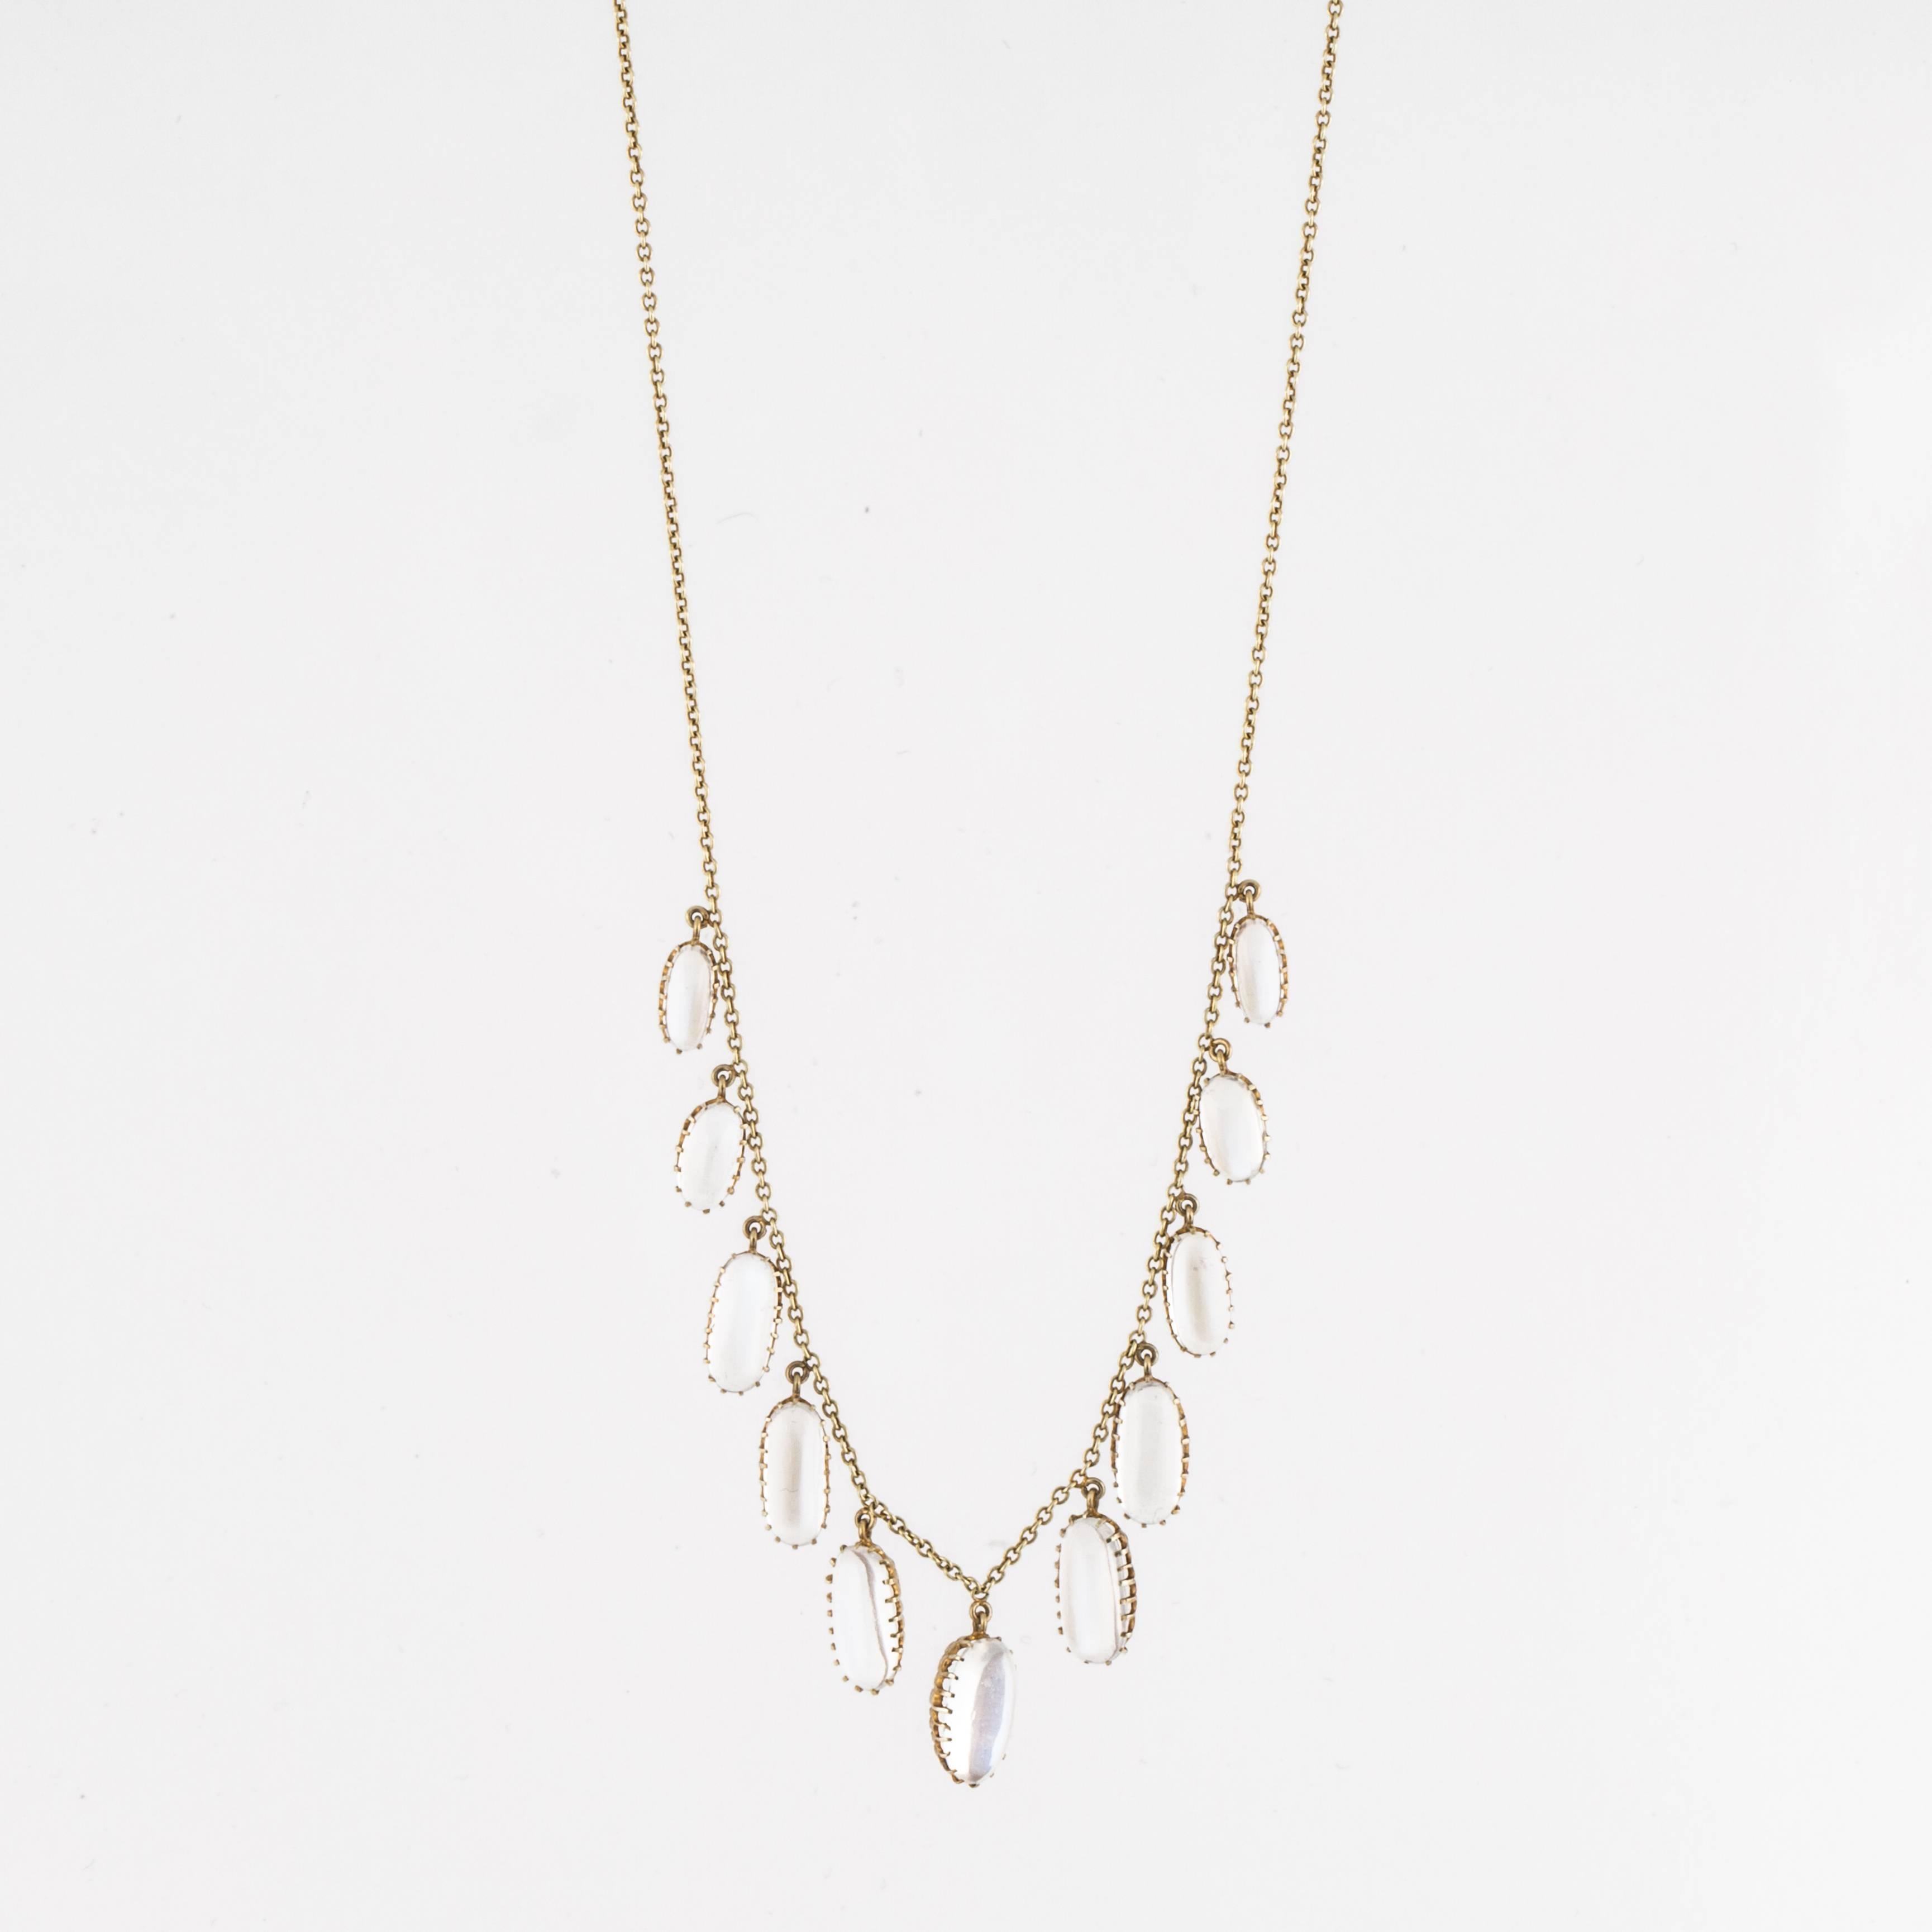 Victorian chain necklace in 15K yellow gold featuring eleven oval moonstones drops. The moonstones are colorless to white body color with blue adularescence.  Marked 